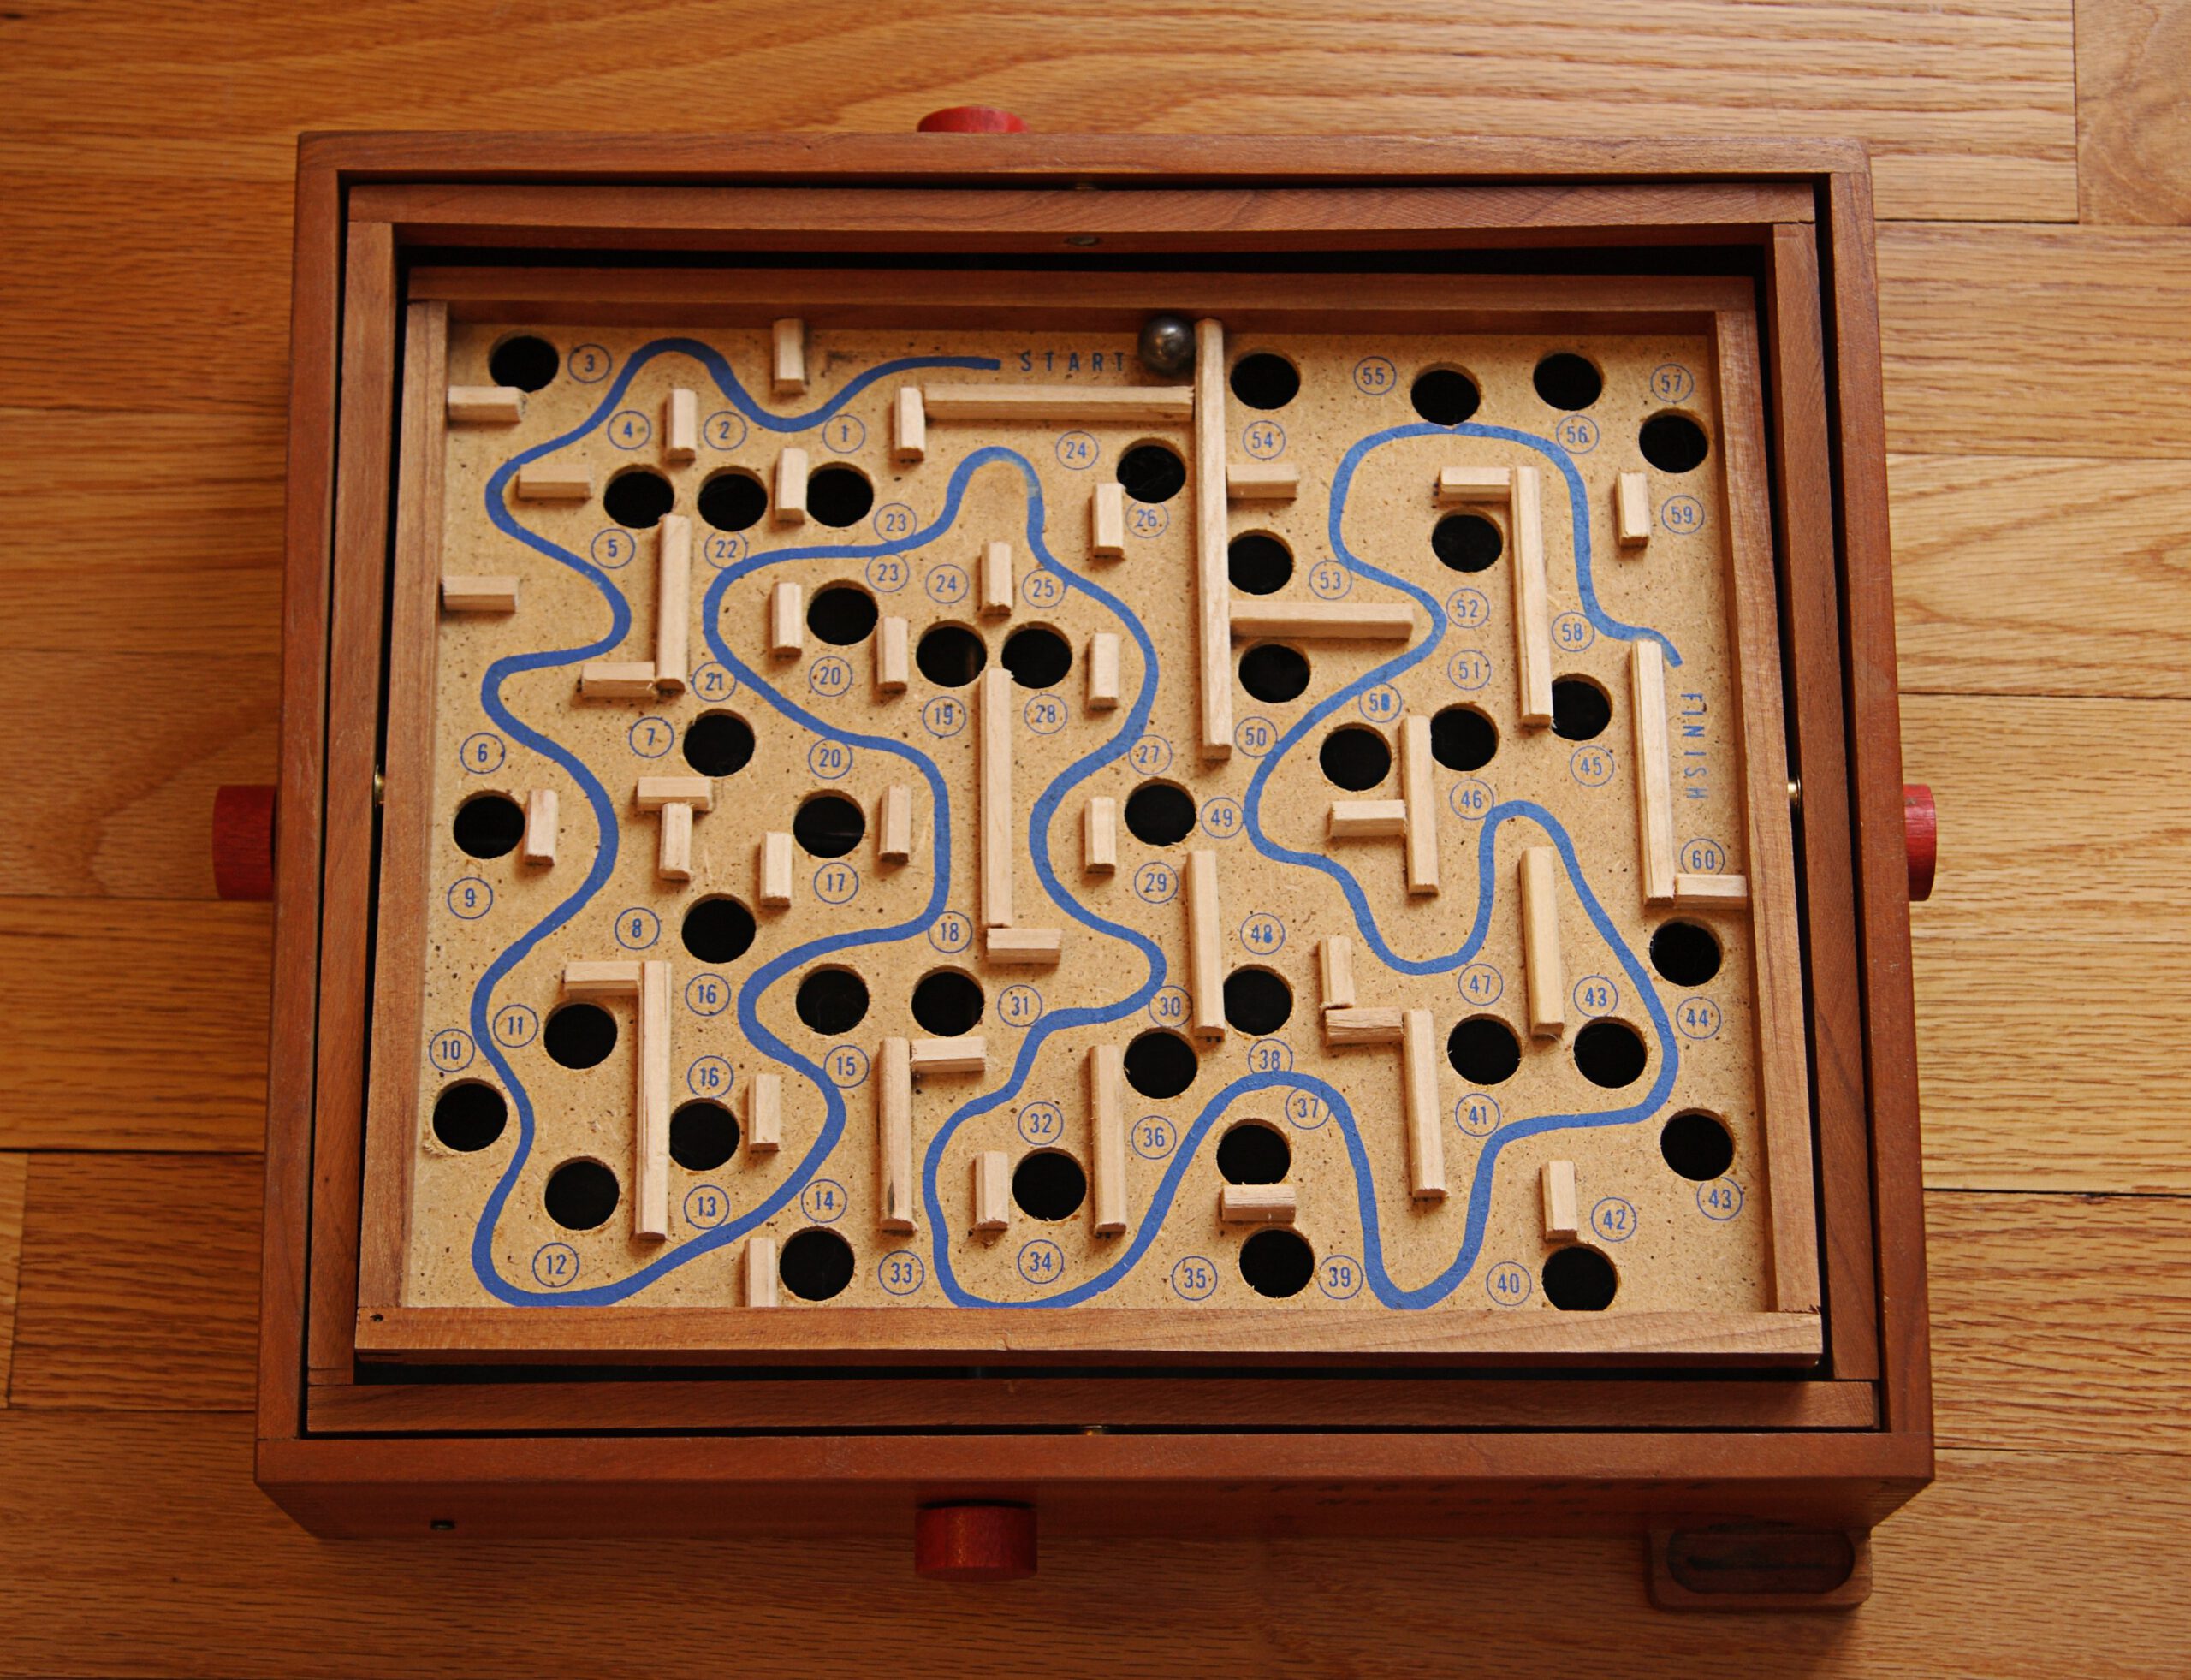 Labyrinth maze game that's a wooden box containing a tilting board on top and a marble 